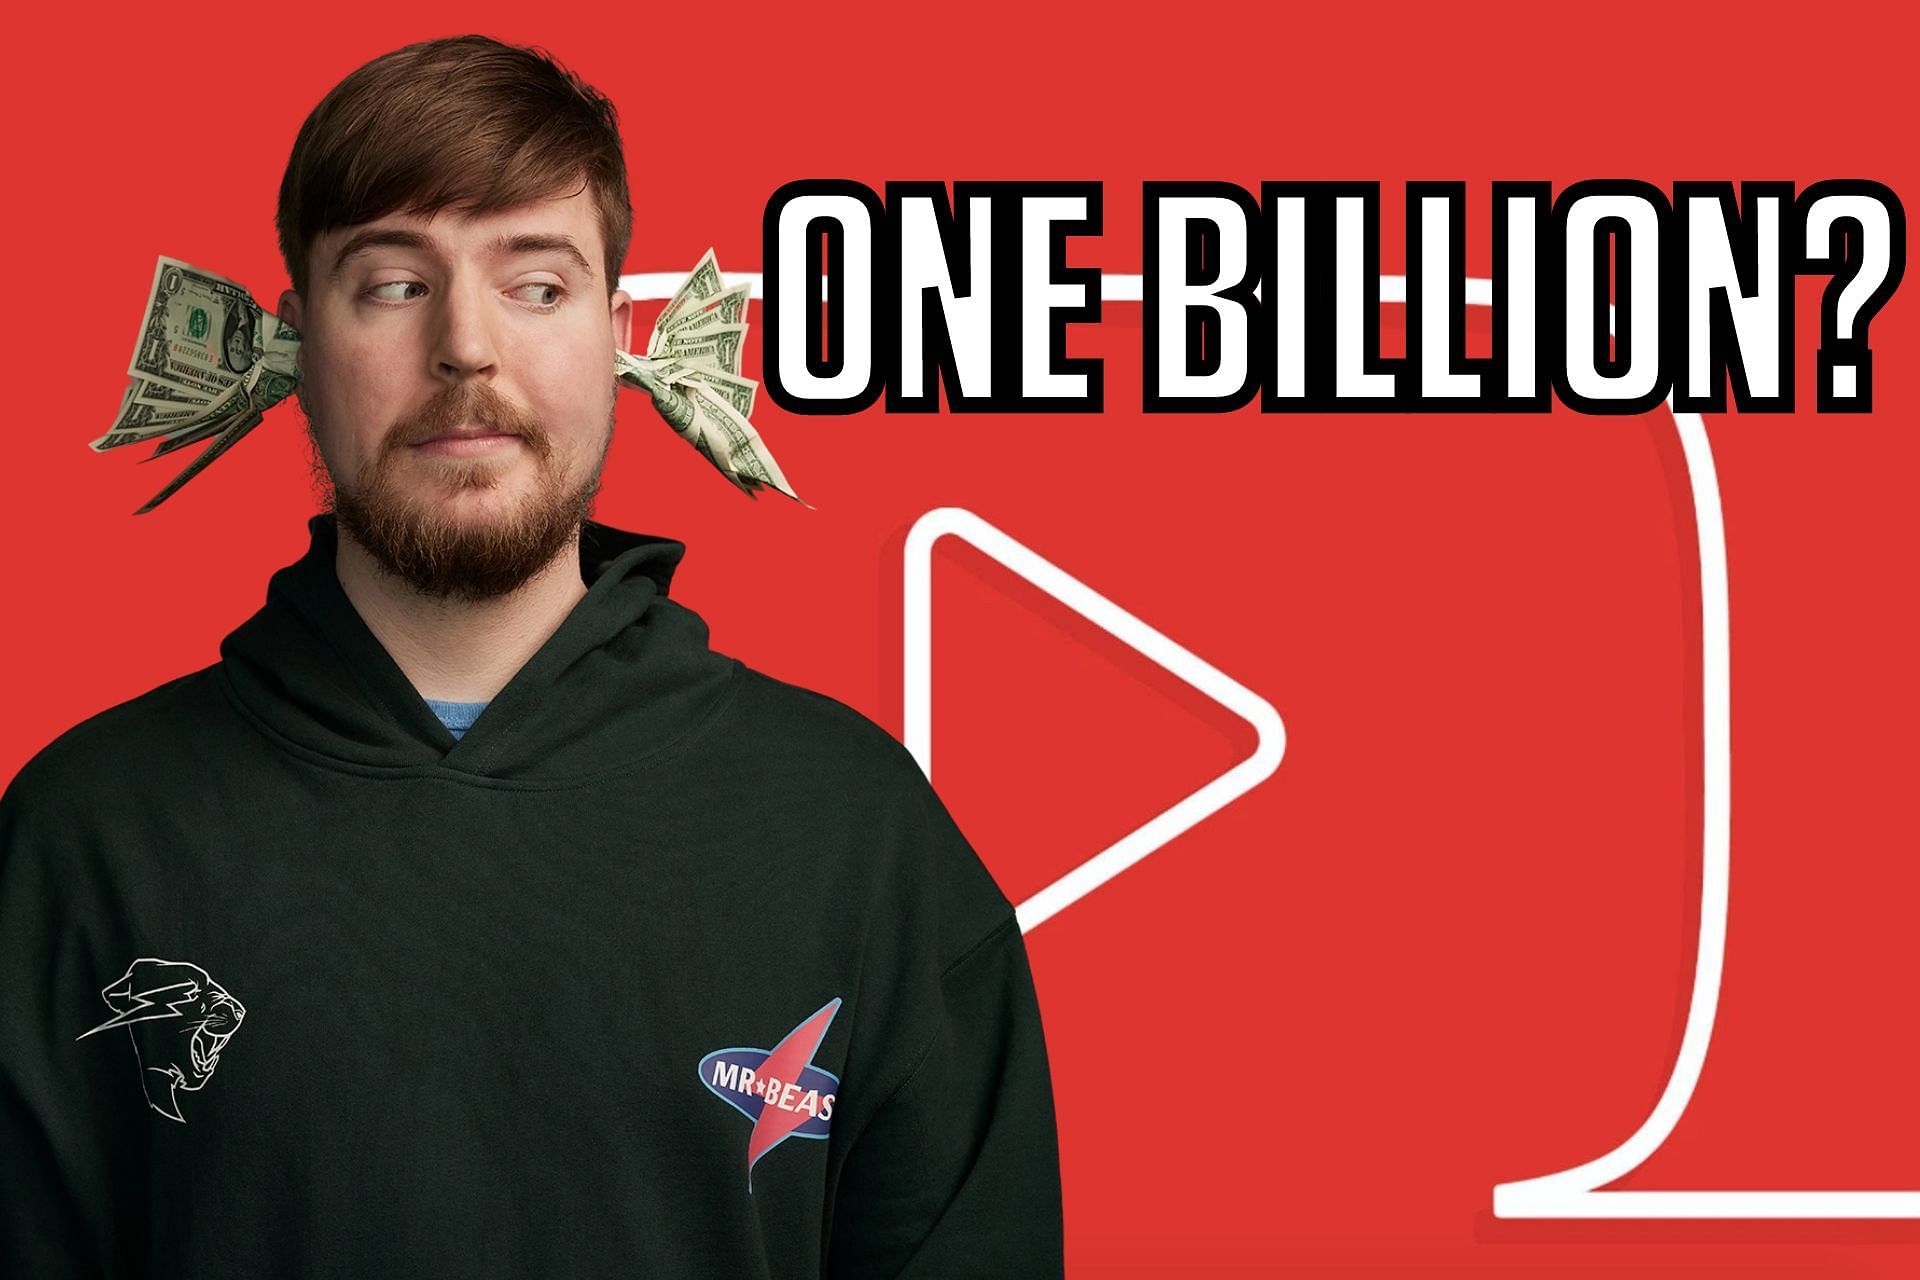 Jimmy reveals his future plans of becoming the first channel to hit a billion subscribers (Image via Sportskeeda)